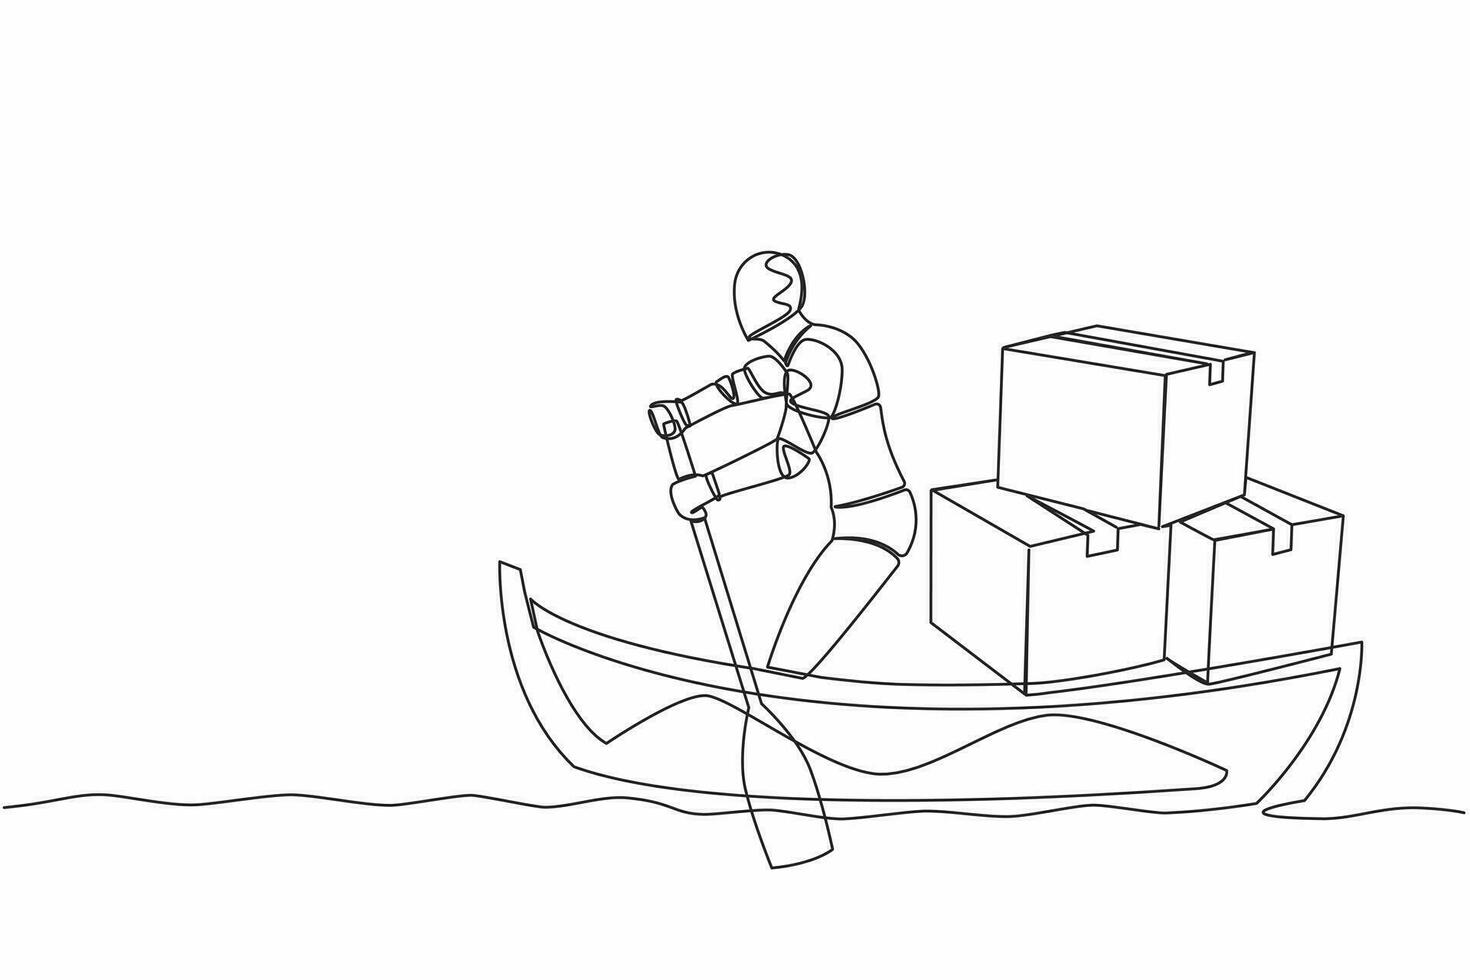 Continuous one line drawing of robot sailing away on boat with pile of cardboard. Ocean shipping transportation. Humanoid robot cybernetic organism. Single line draw design vector graphic illustration